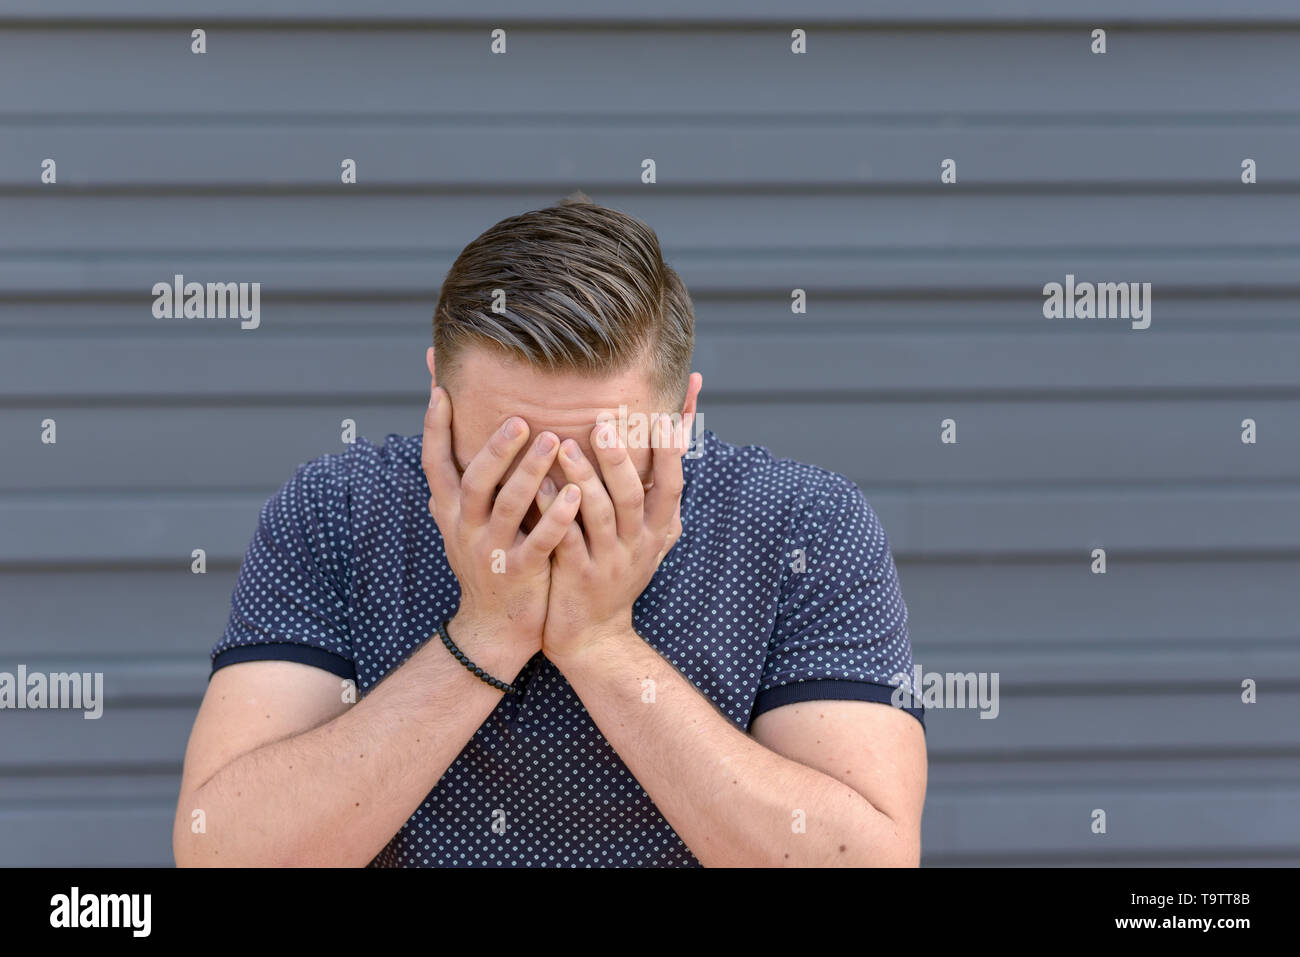 Depressed or despondent young man overcome by hopelessness standing with his head in his hands in front of a grey wall with copy space Stock Photo